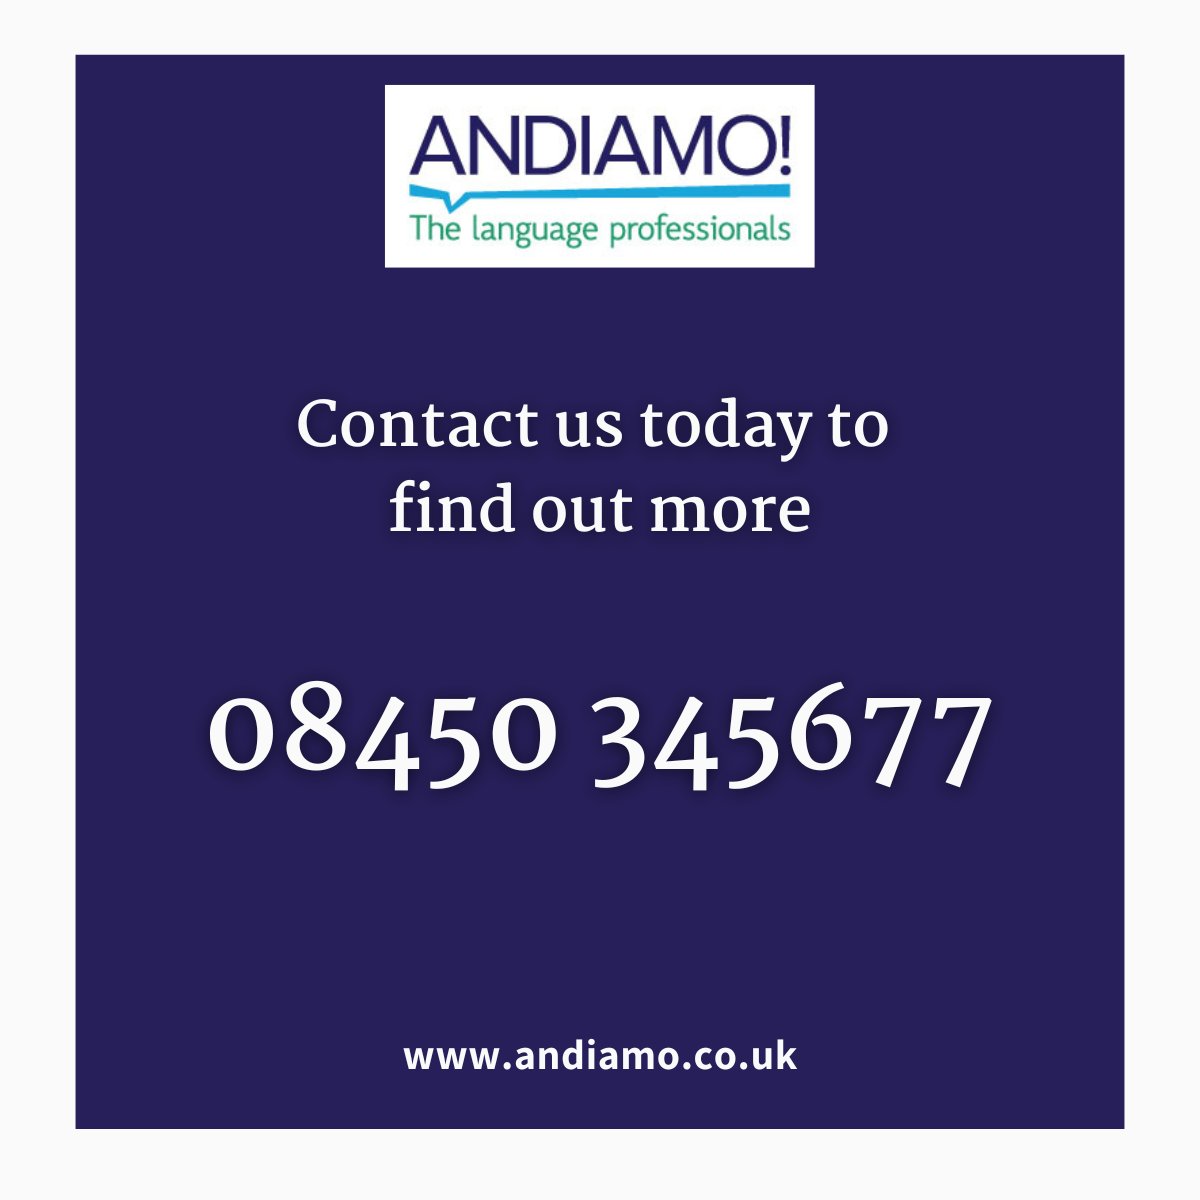 Got a PDF needing translation? No sweat 😉

Whatever the format, we've got you covered!

Reach out to discuss: 
📞 08450 345677 
📧 info@andiamo.co.uk

#TranslationServices #PDFTranslation